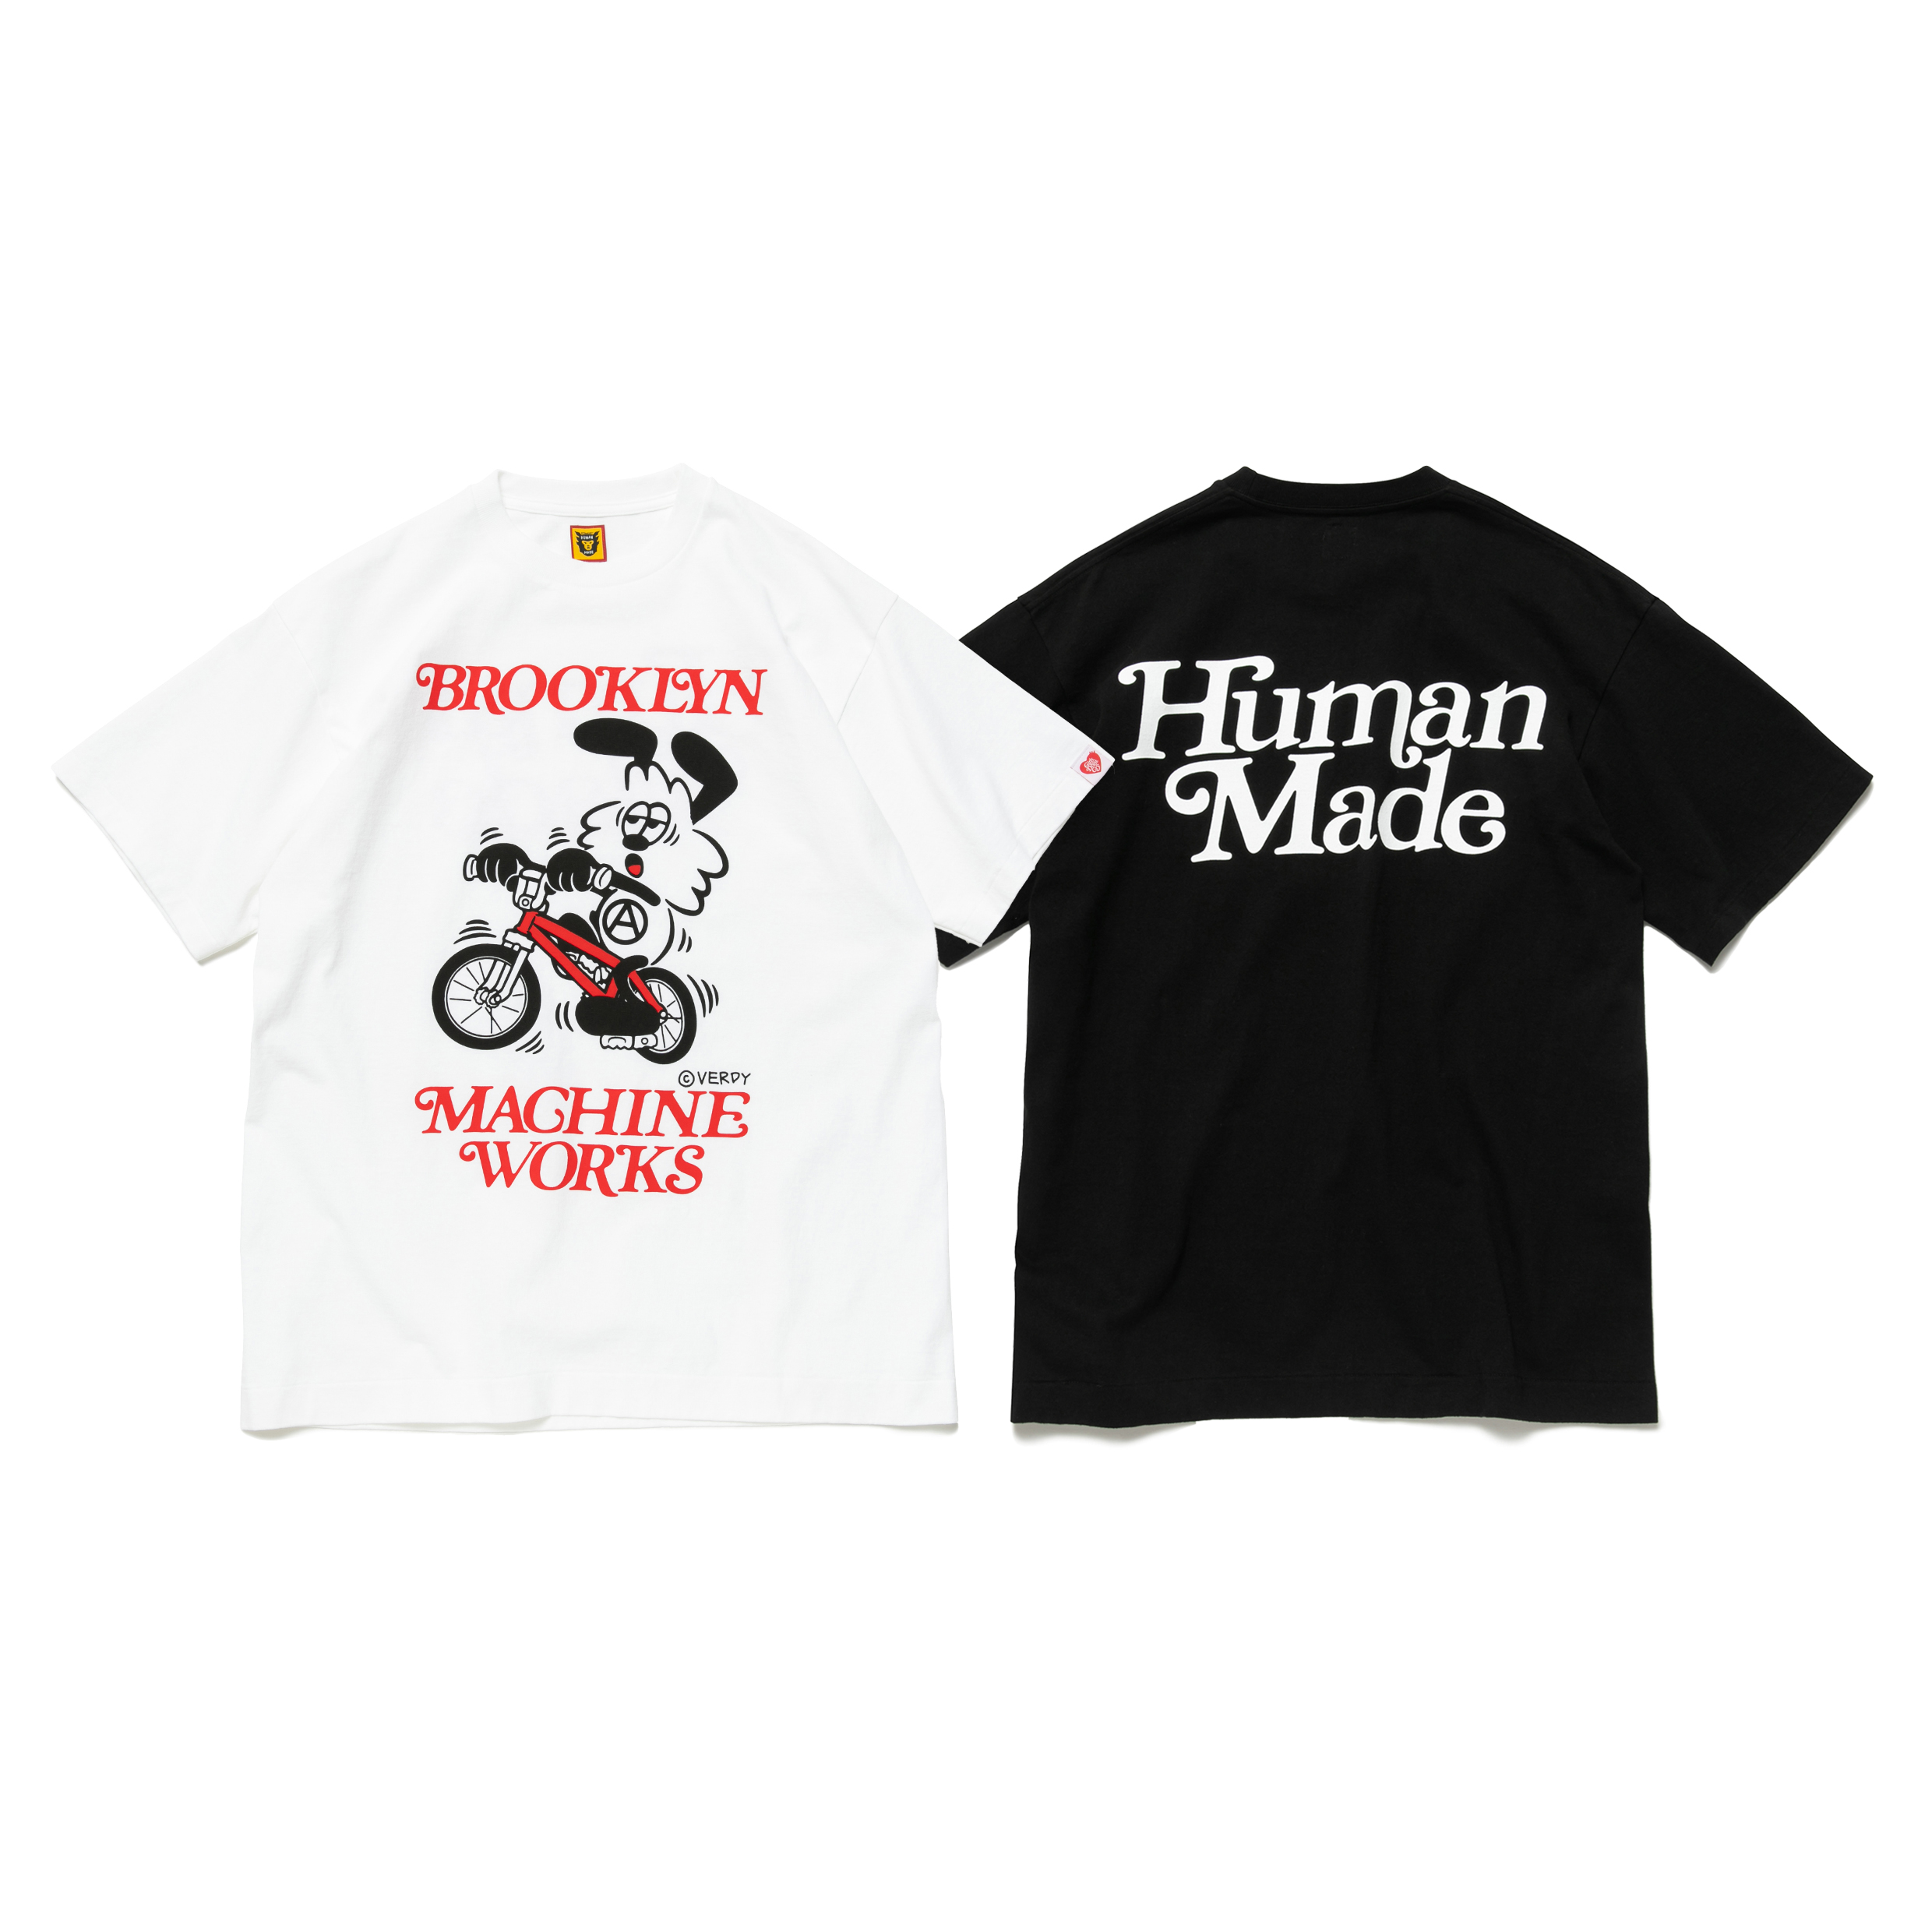 HUMAN MADE x BROOKLYN MACHINE WORKS x Girls Don't Cry Collaboration  Collection | NEWS | OTSUMO CO.,LTD.